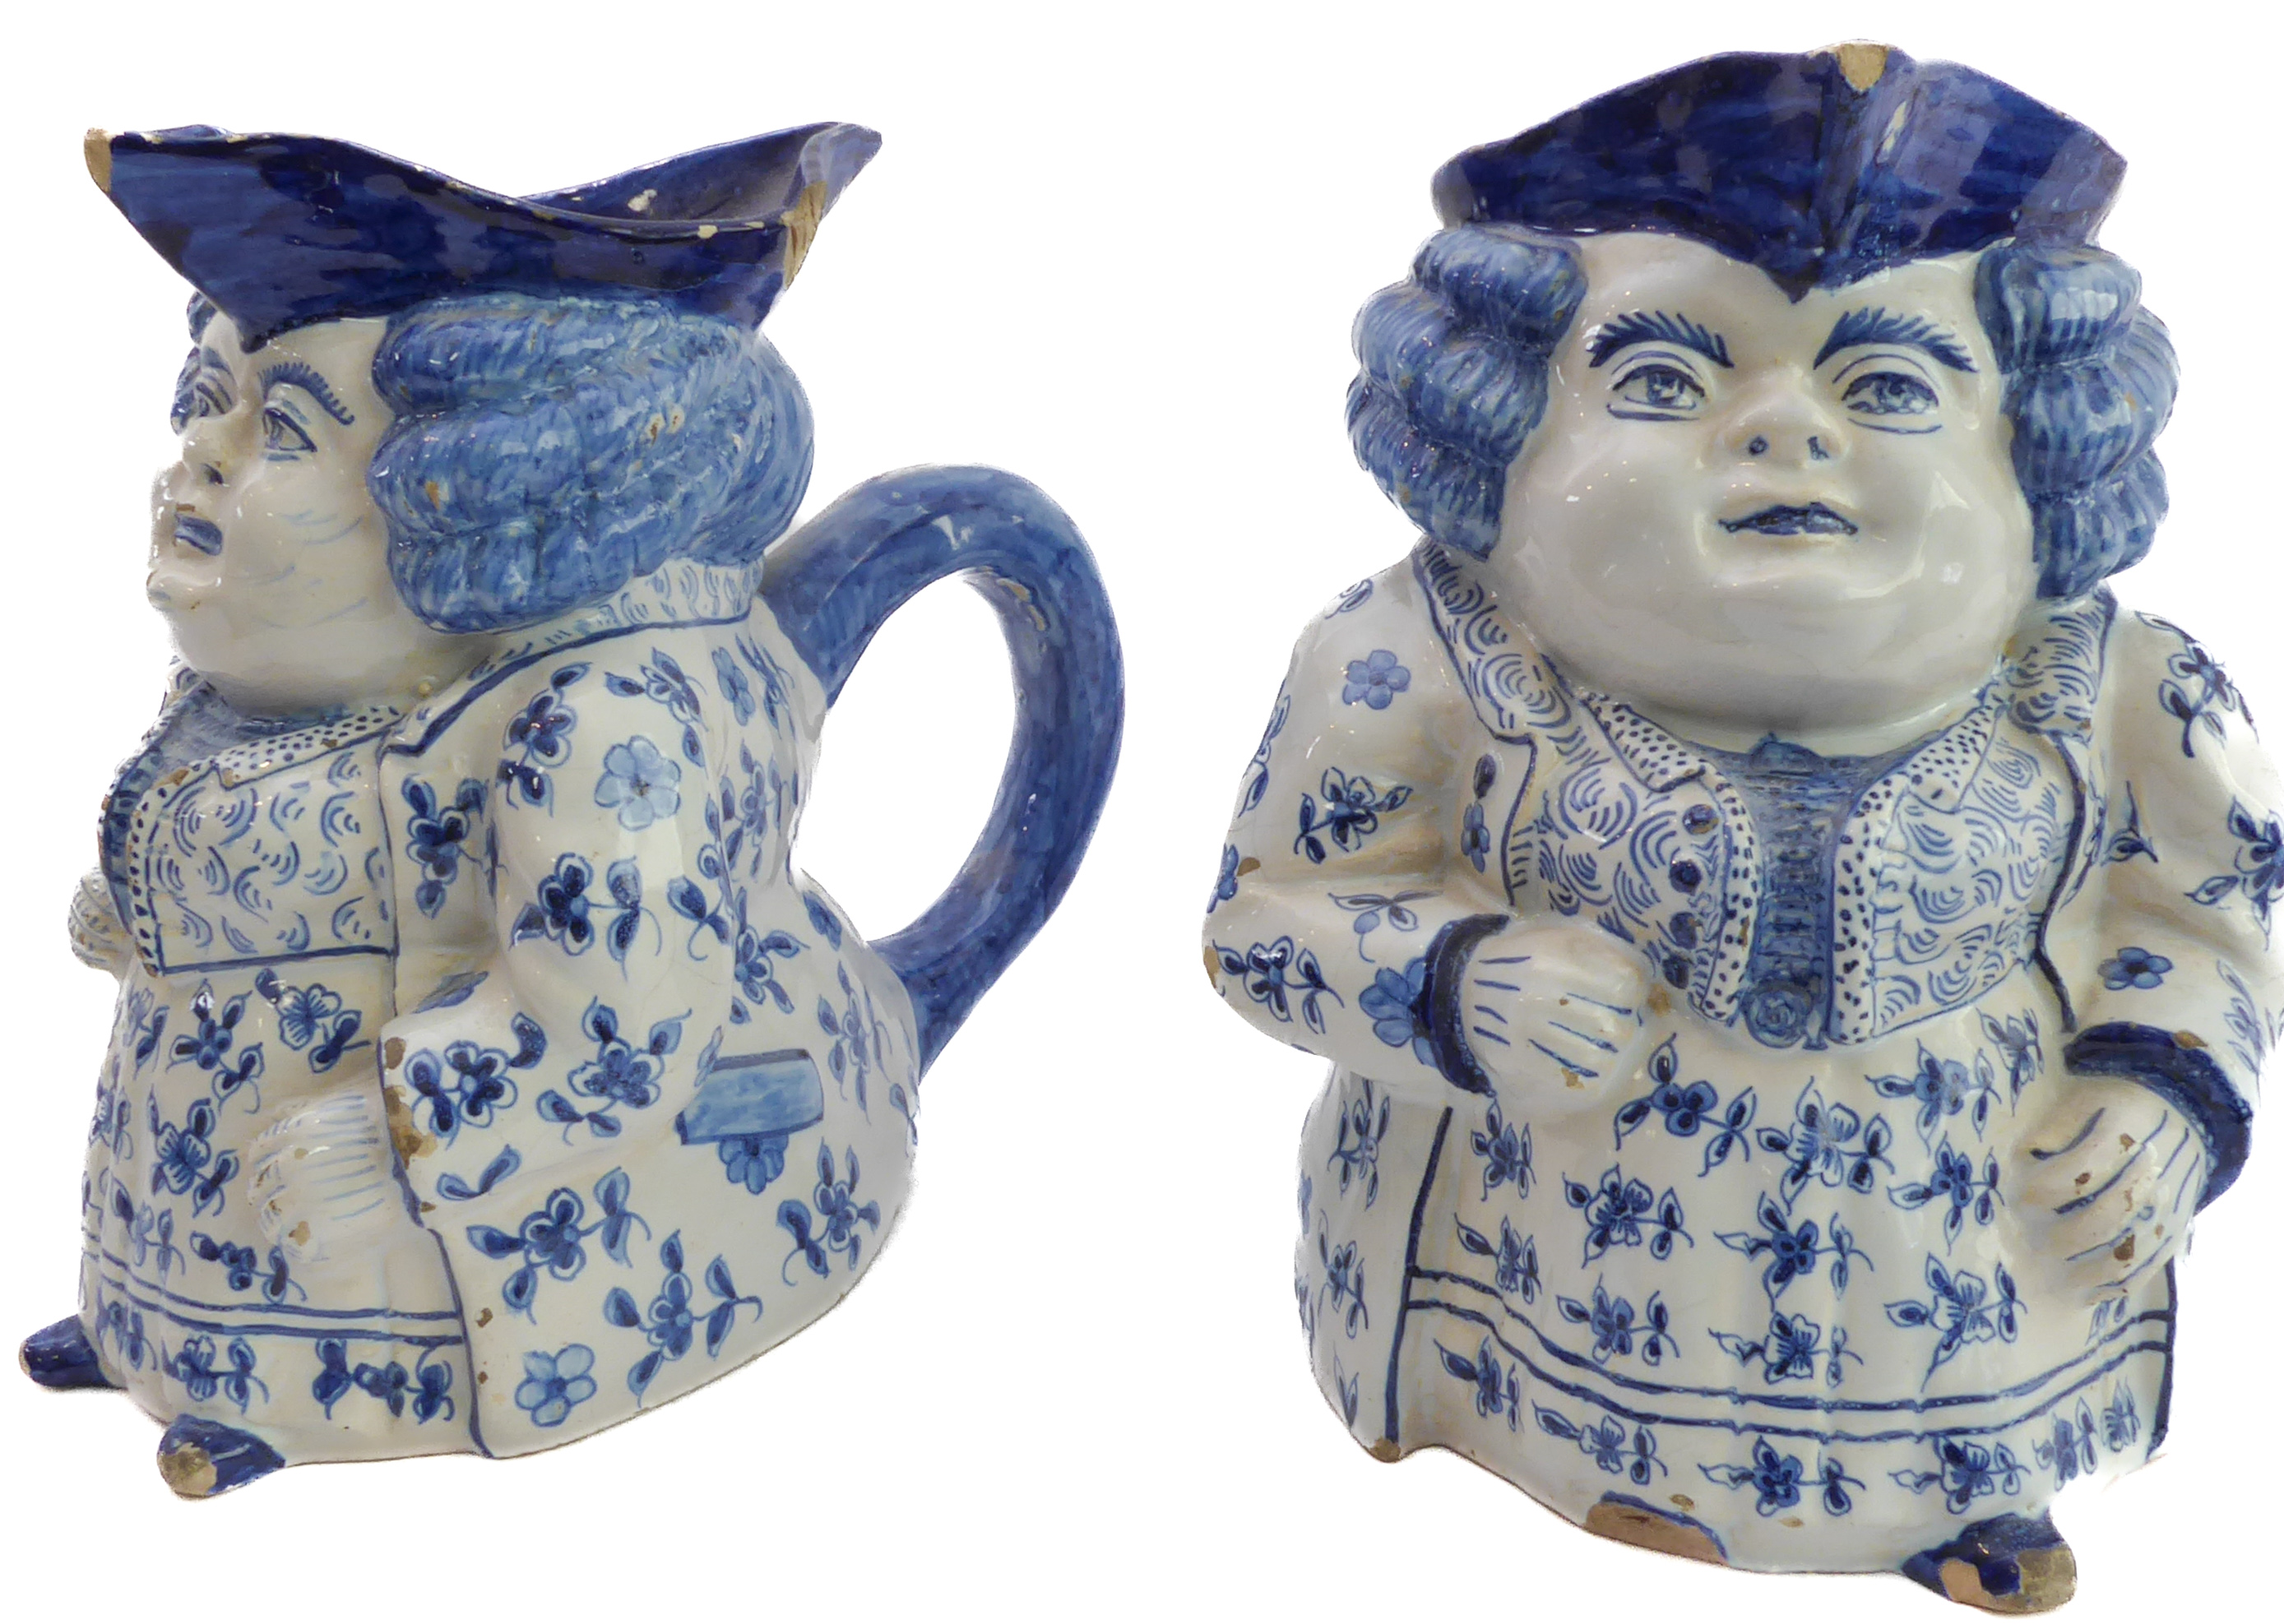 A pair of Delftware Toby jugs  - probably late 19th or early 20th century, modelled as corpulent